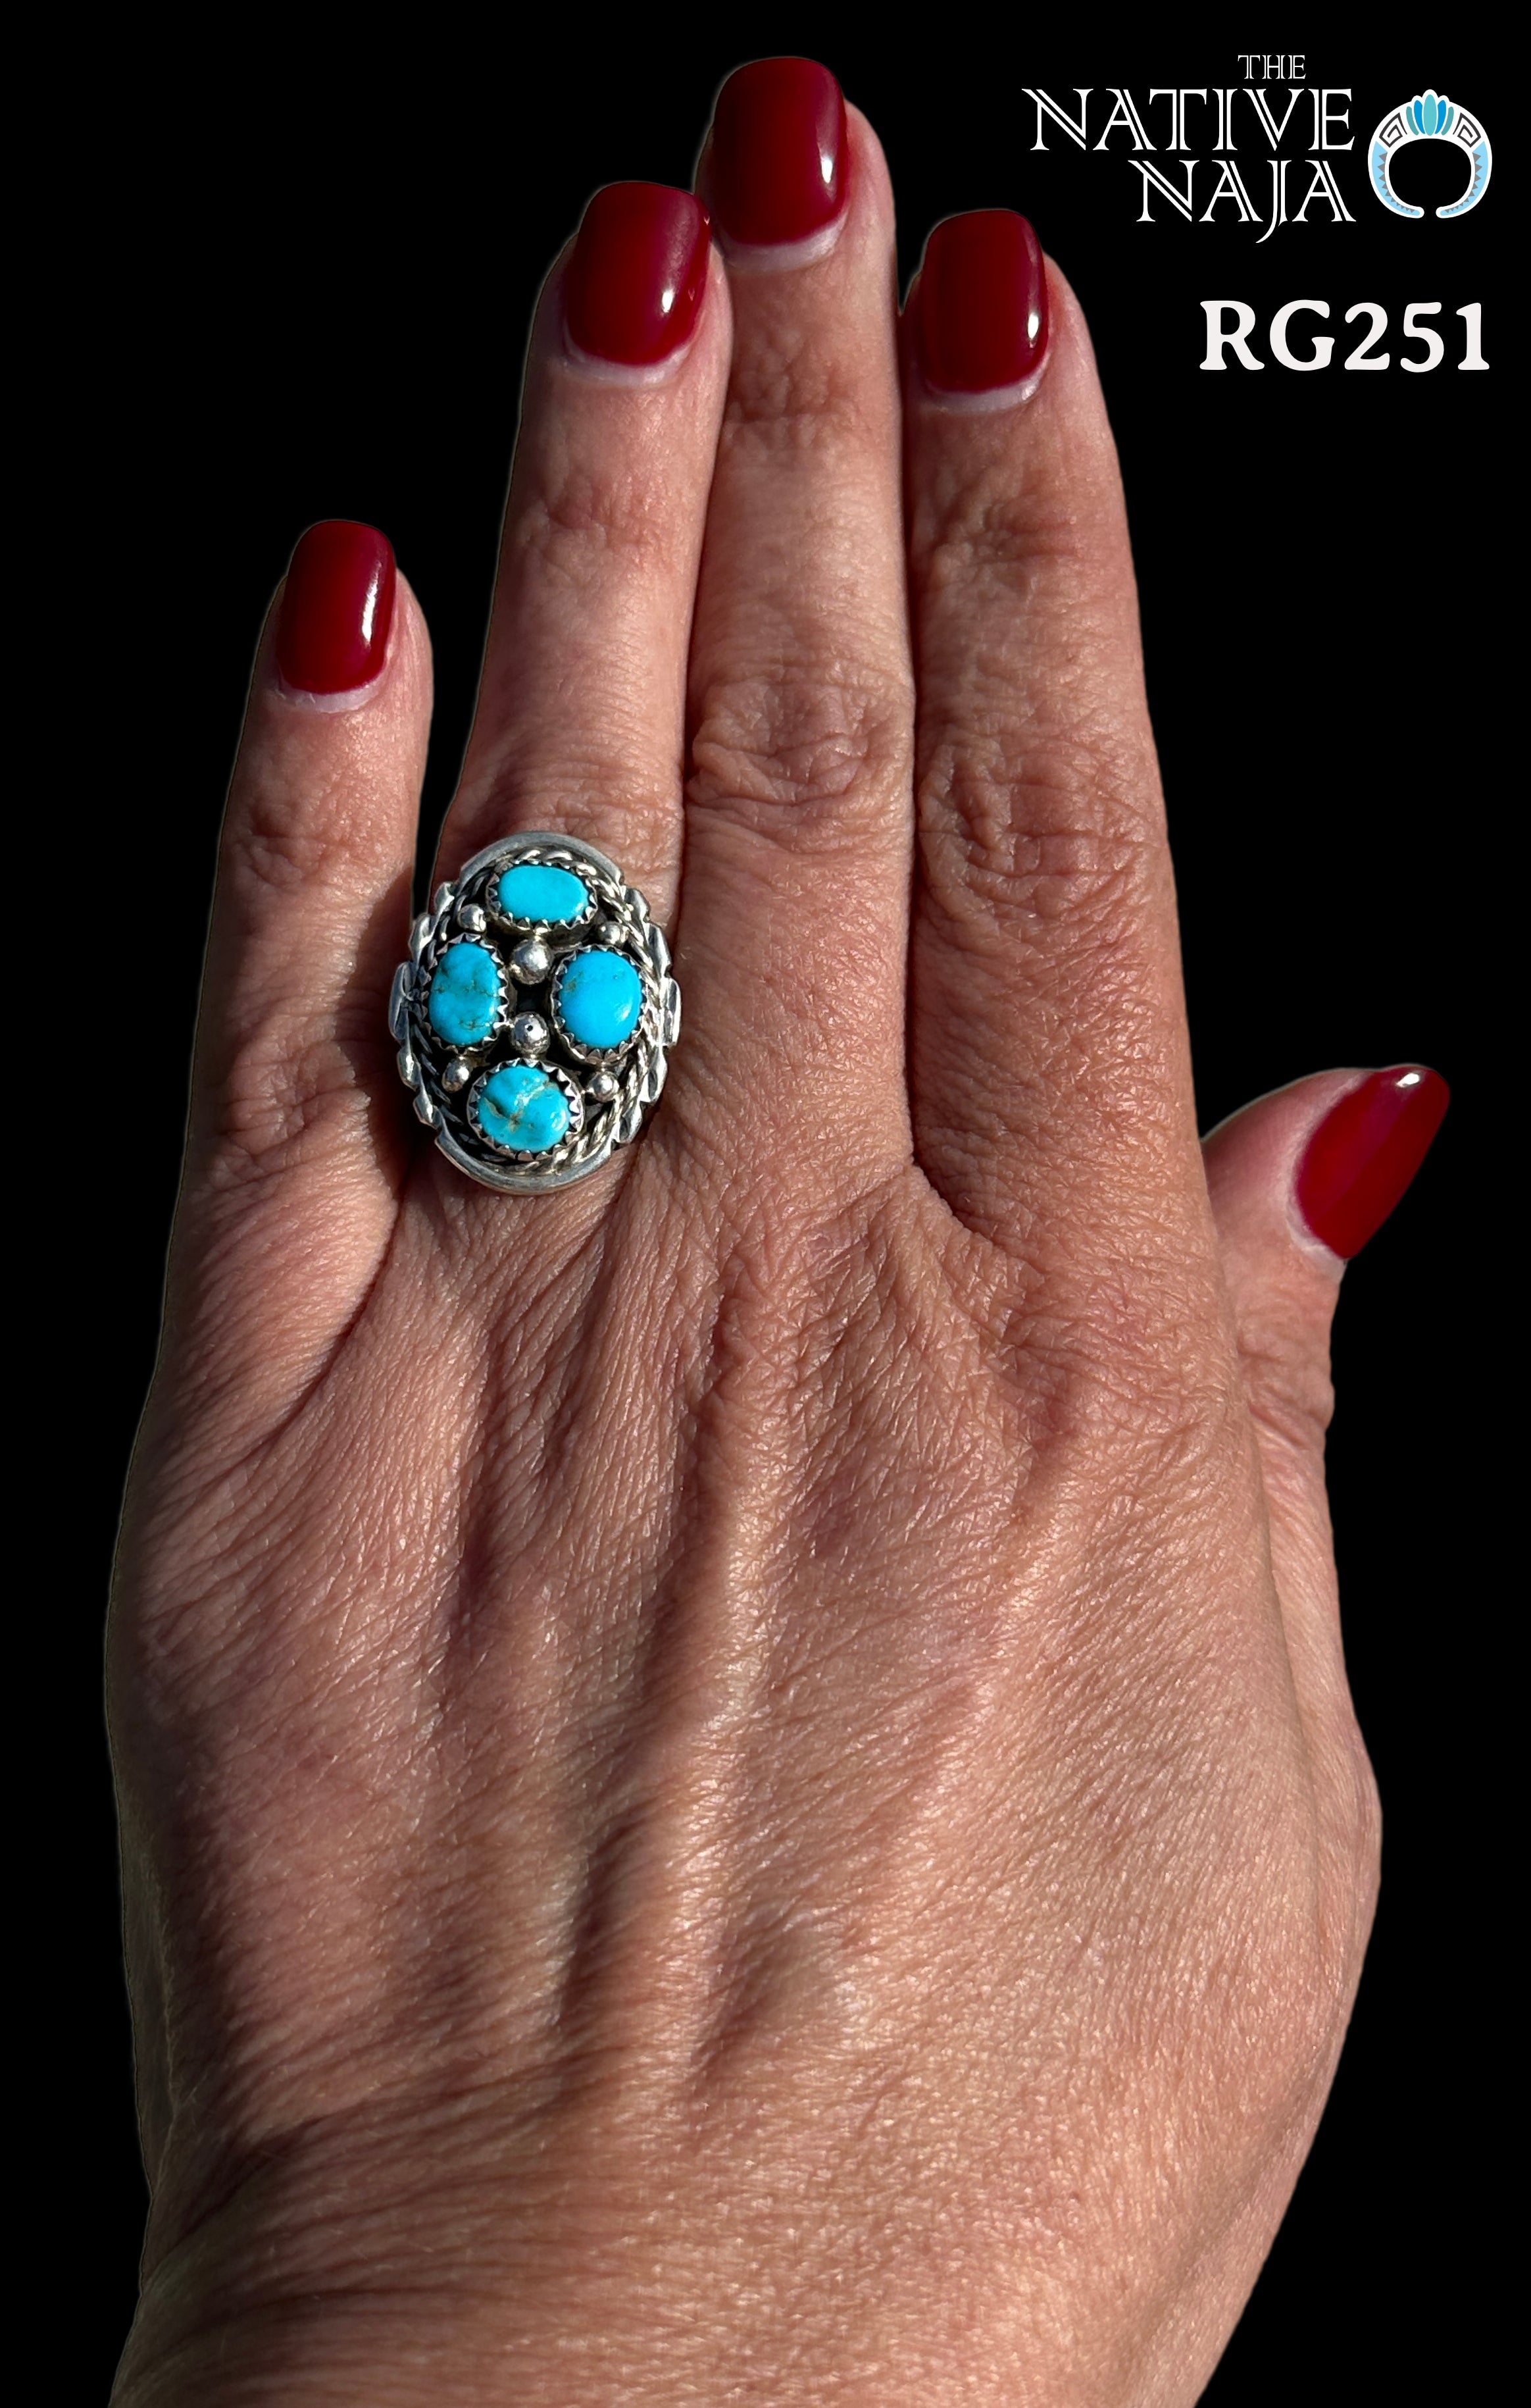 Navajo Melvin Chee Sterling Silver & Kingman Turquoise Cluster Ring SZ 8 1/4 RG251